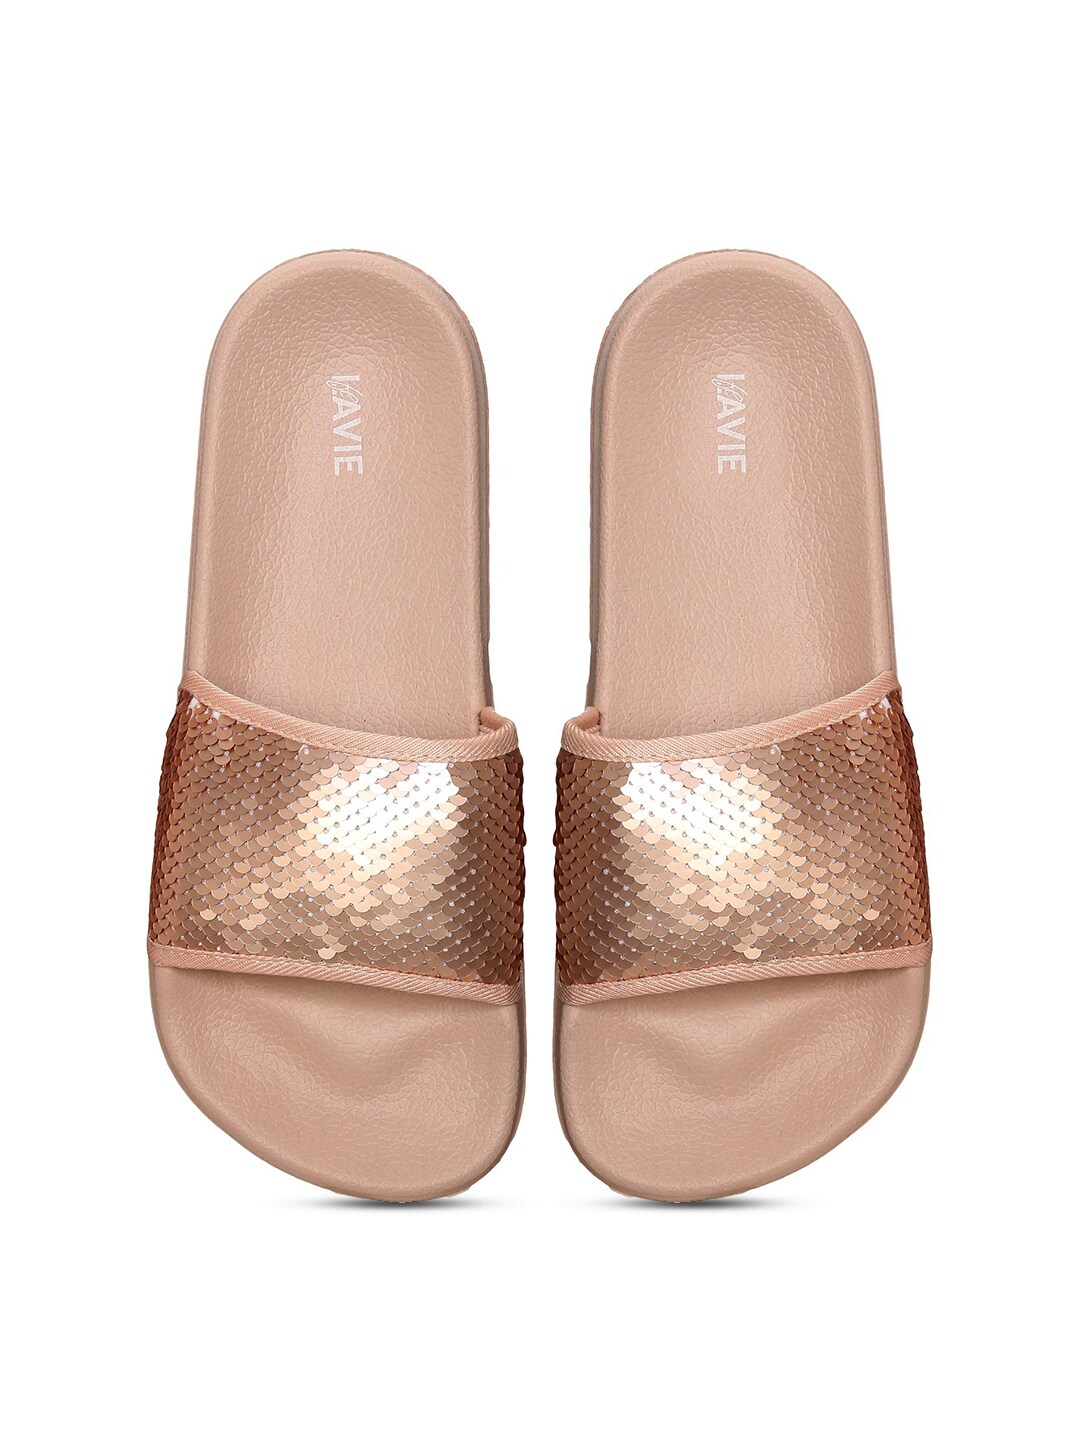 Lavie Women Rose Gold Embellished Sliders Price in India